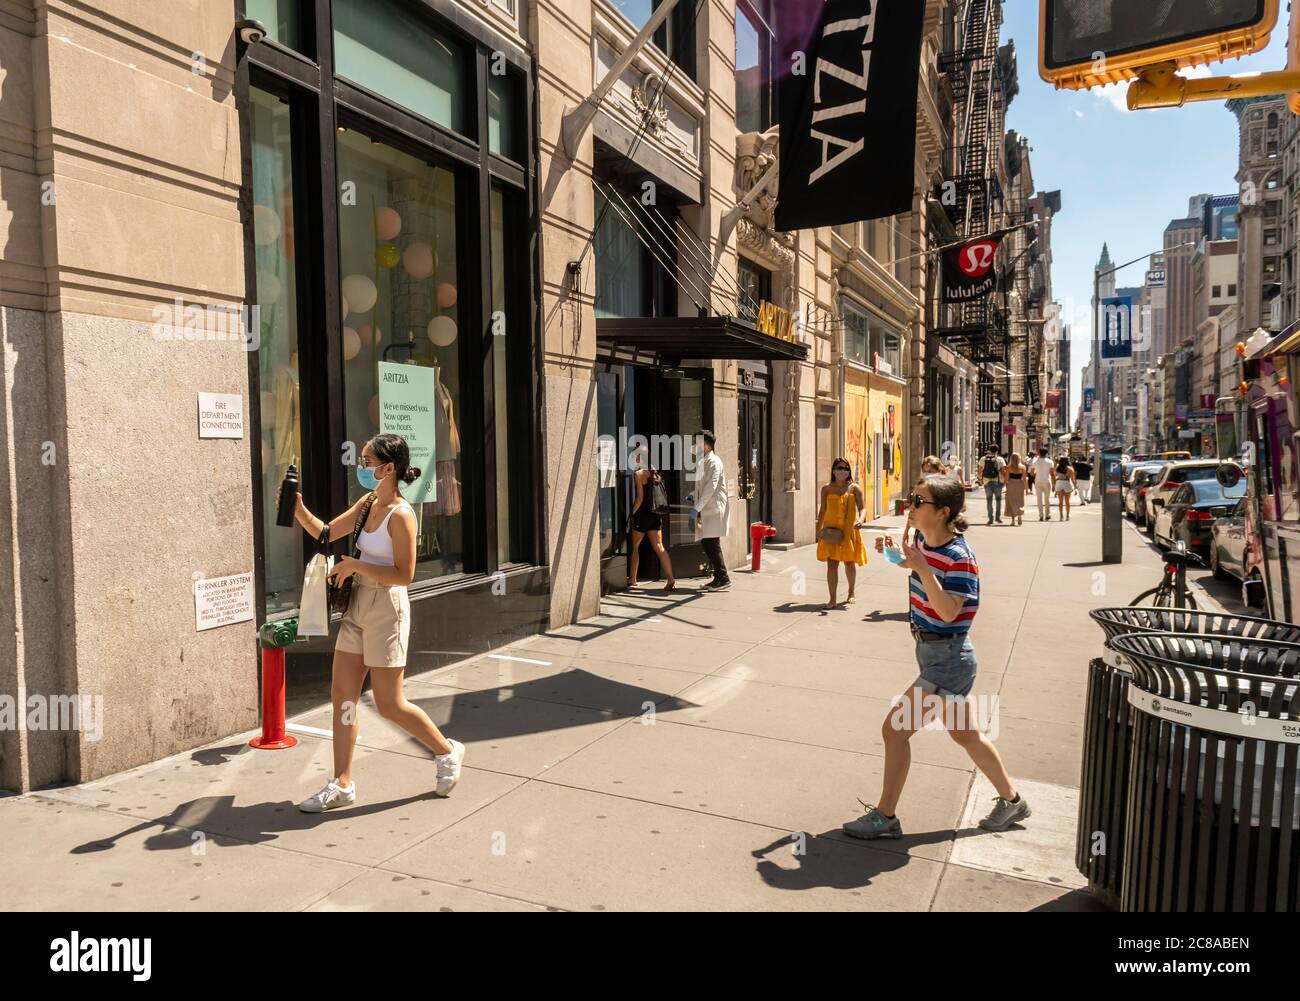 Shoppers in the Soho neighborhood of New York on Sunday, July 12, 2020. As part of the Phase 3 reopening in New York stores are allowed in-store shopping with restrictions. (© Richard B. Levine) Stock Photo